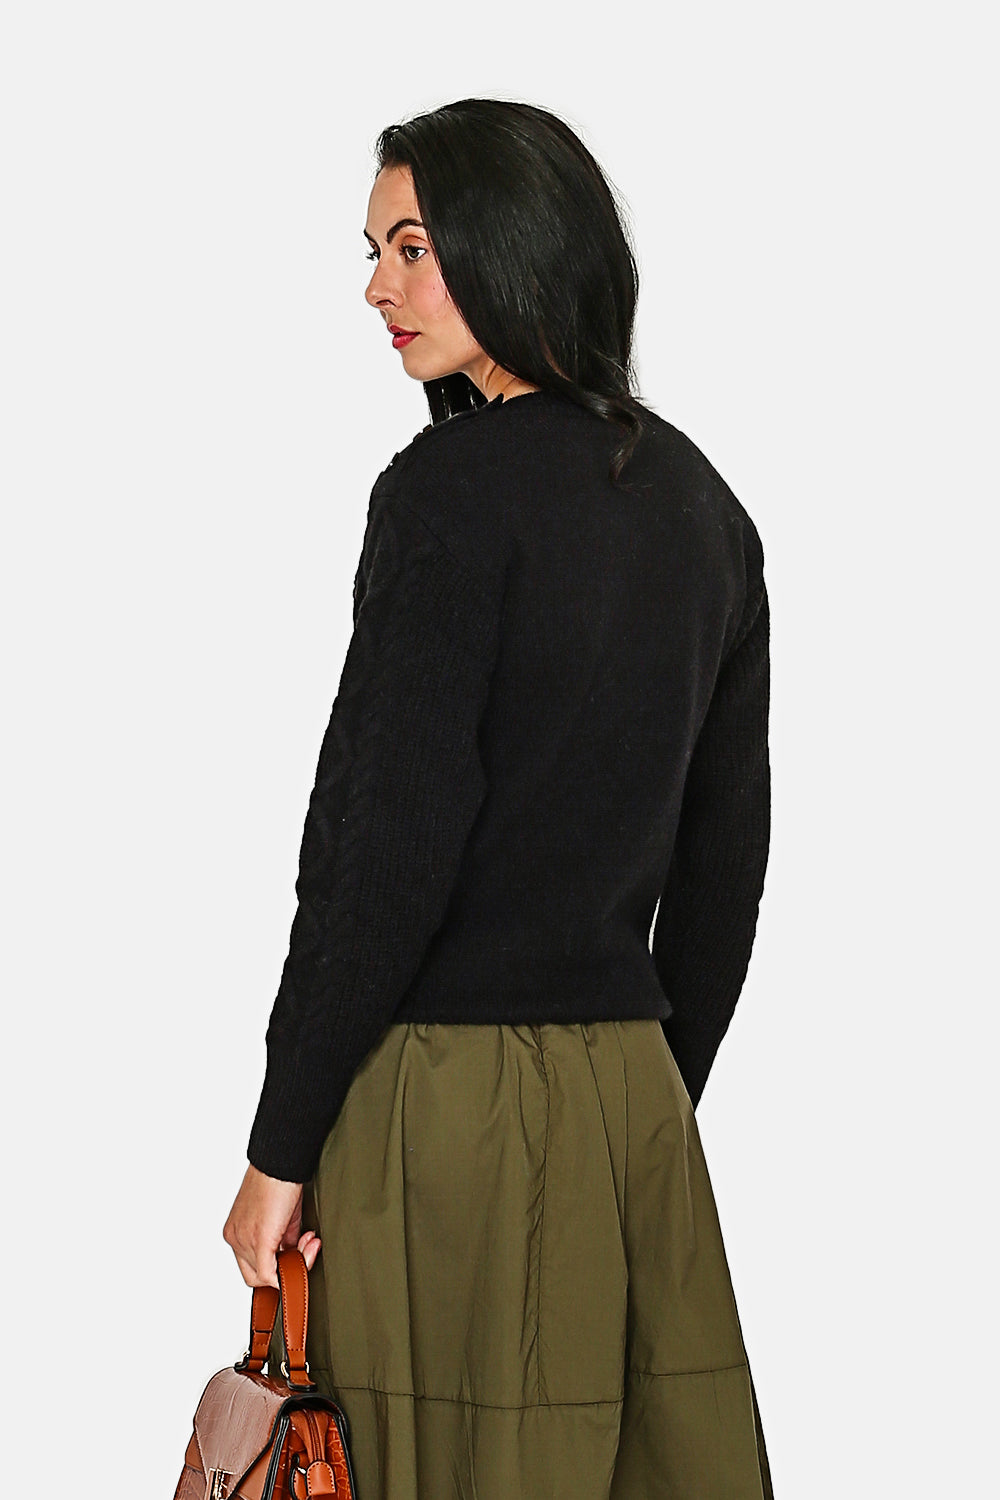 Slightly high neck sweater with fancy buttons on the shoulder